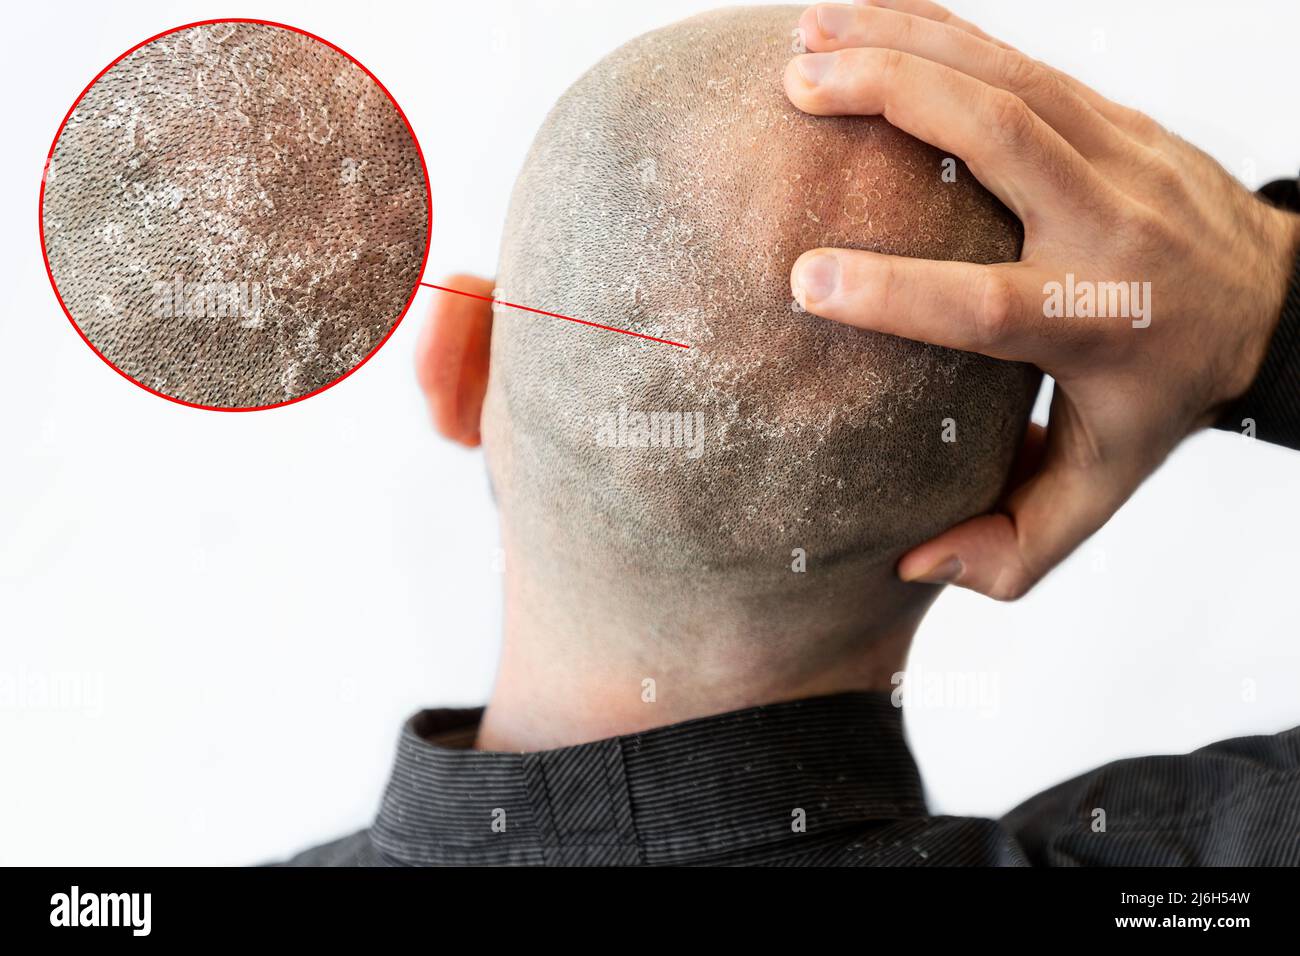 A Man In A Black Shirt Is Holding His Bald Flaky Head Covered With Seborrheic Dermatitis And